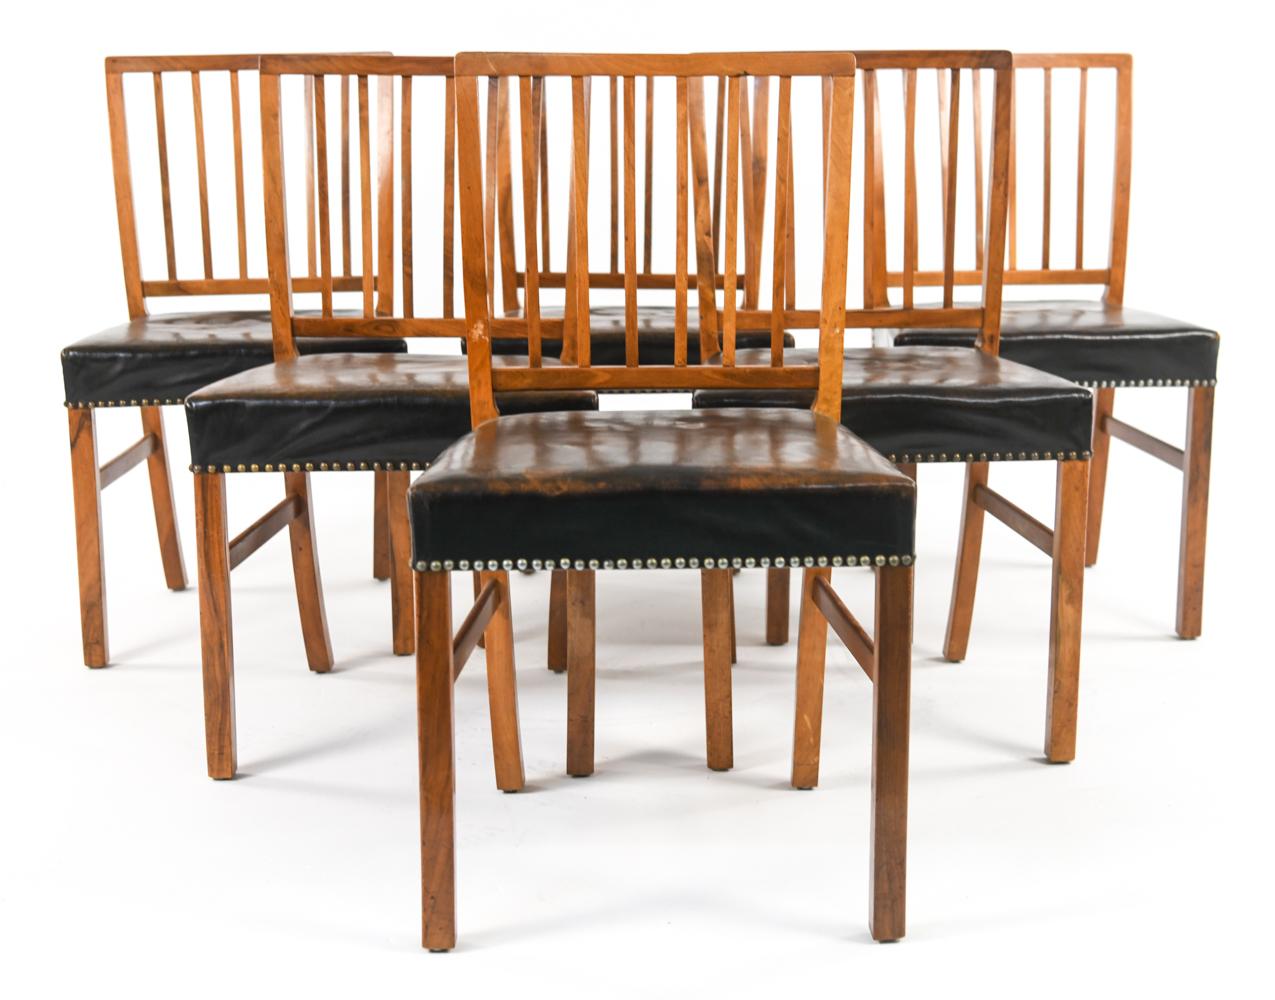 A handsome Danish mid-century mahogany dining suite comprised of (6) dining chairs featuring elegant brass nailhead trim to brown leather patinated seat upholstery and slatted backrests, and a round dining table with (4) 23.5